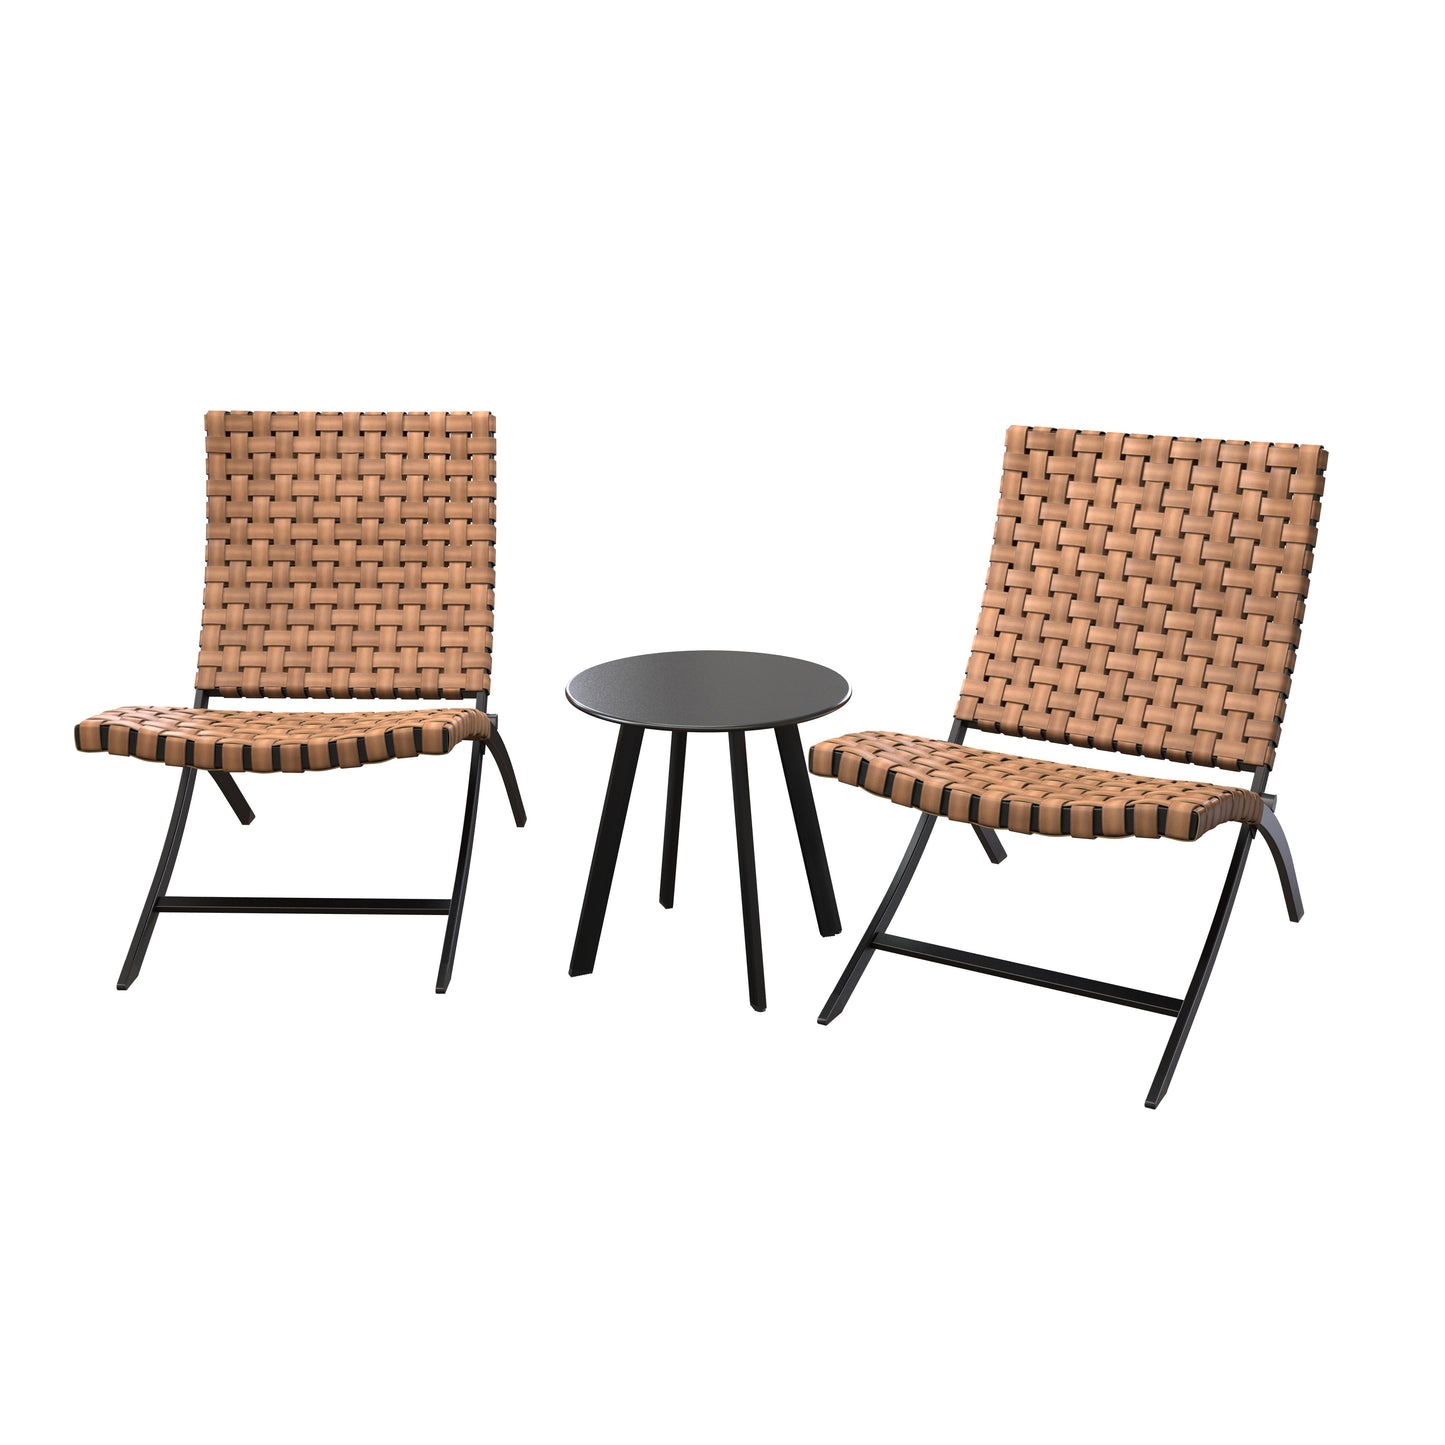 3 Piece Rattan Patio Set  Foldable Wicker Lounger Chairs and Coffee Table Set